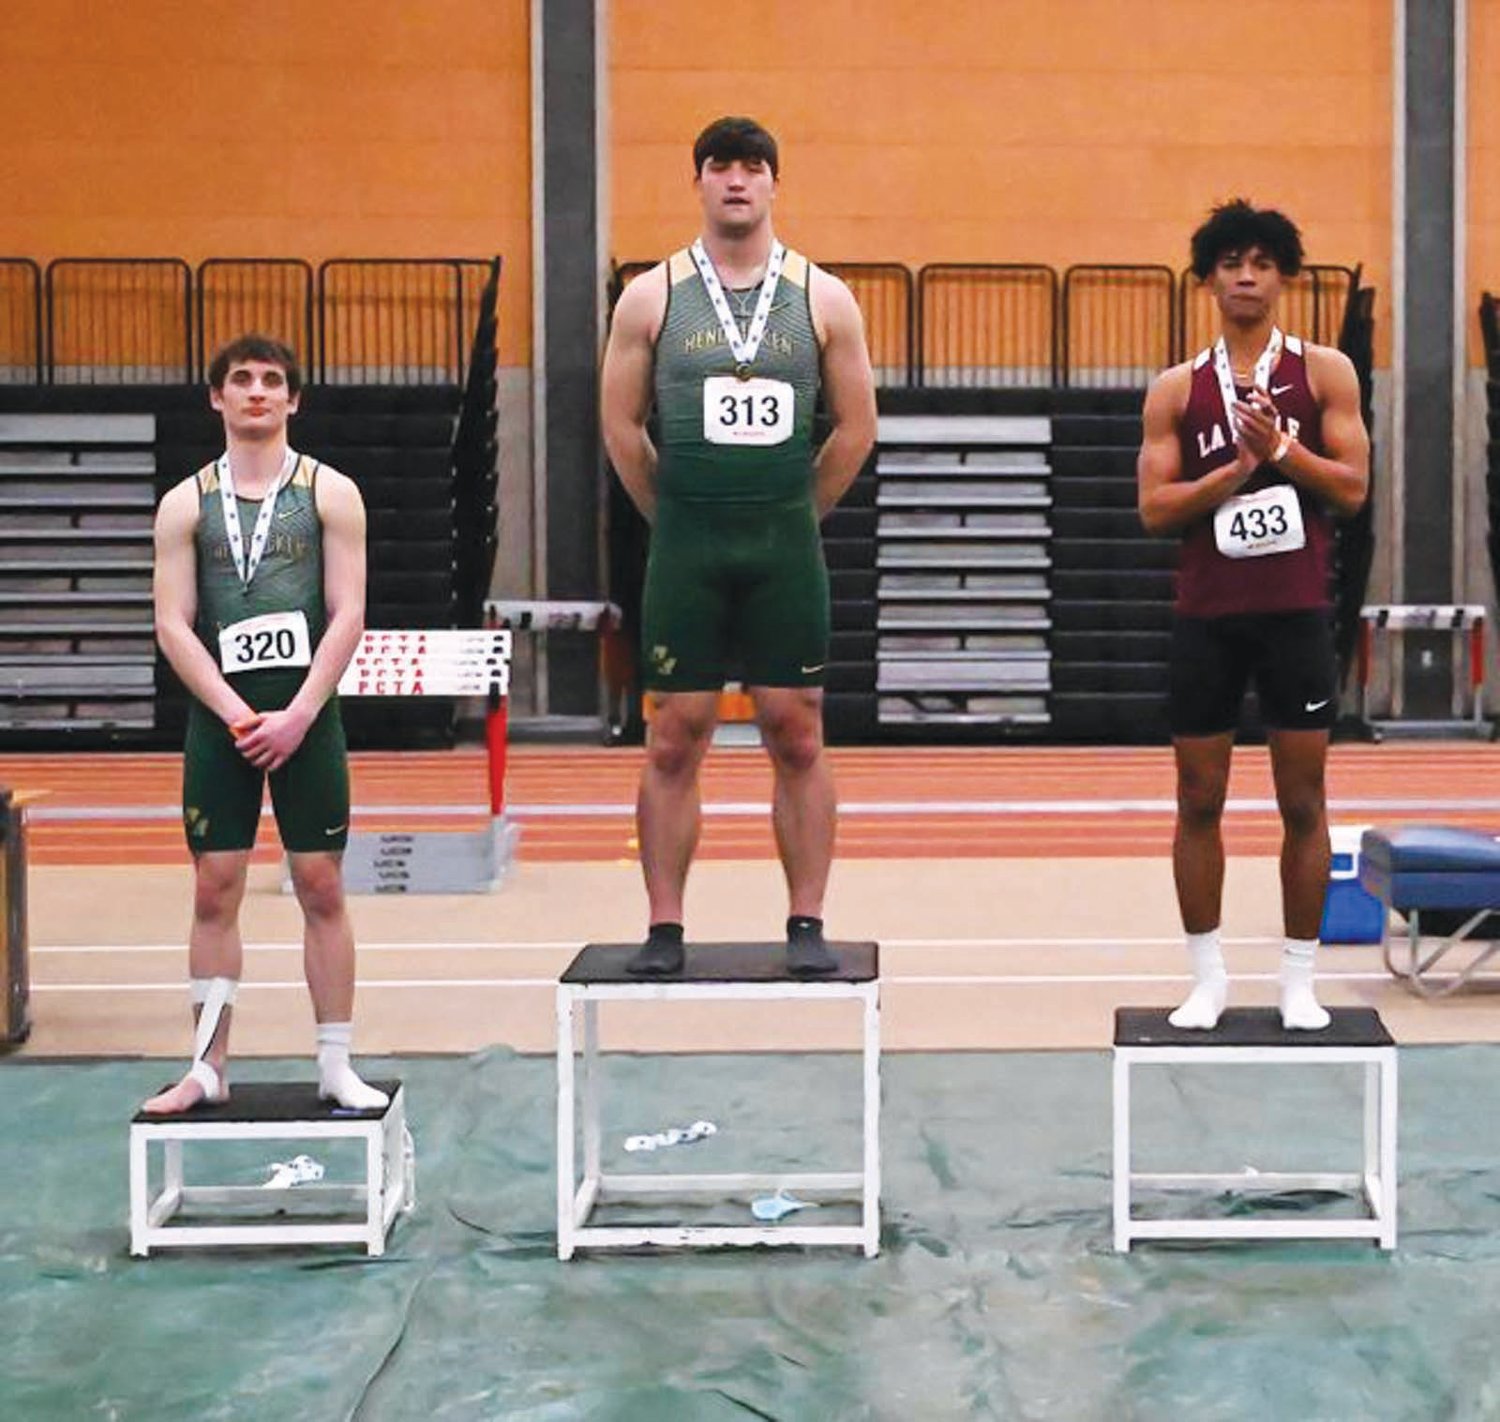 TOP OF THE PODIUM: Bishop Hendricken’s Brandyn Durand (center) after wiinning the 300 meter dash at last
week’s indoor track state championships in Providence.